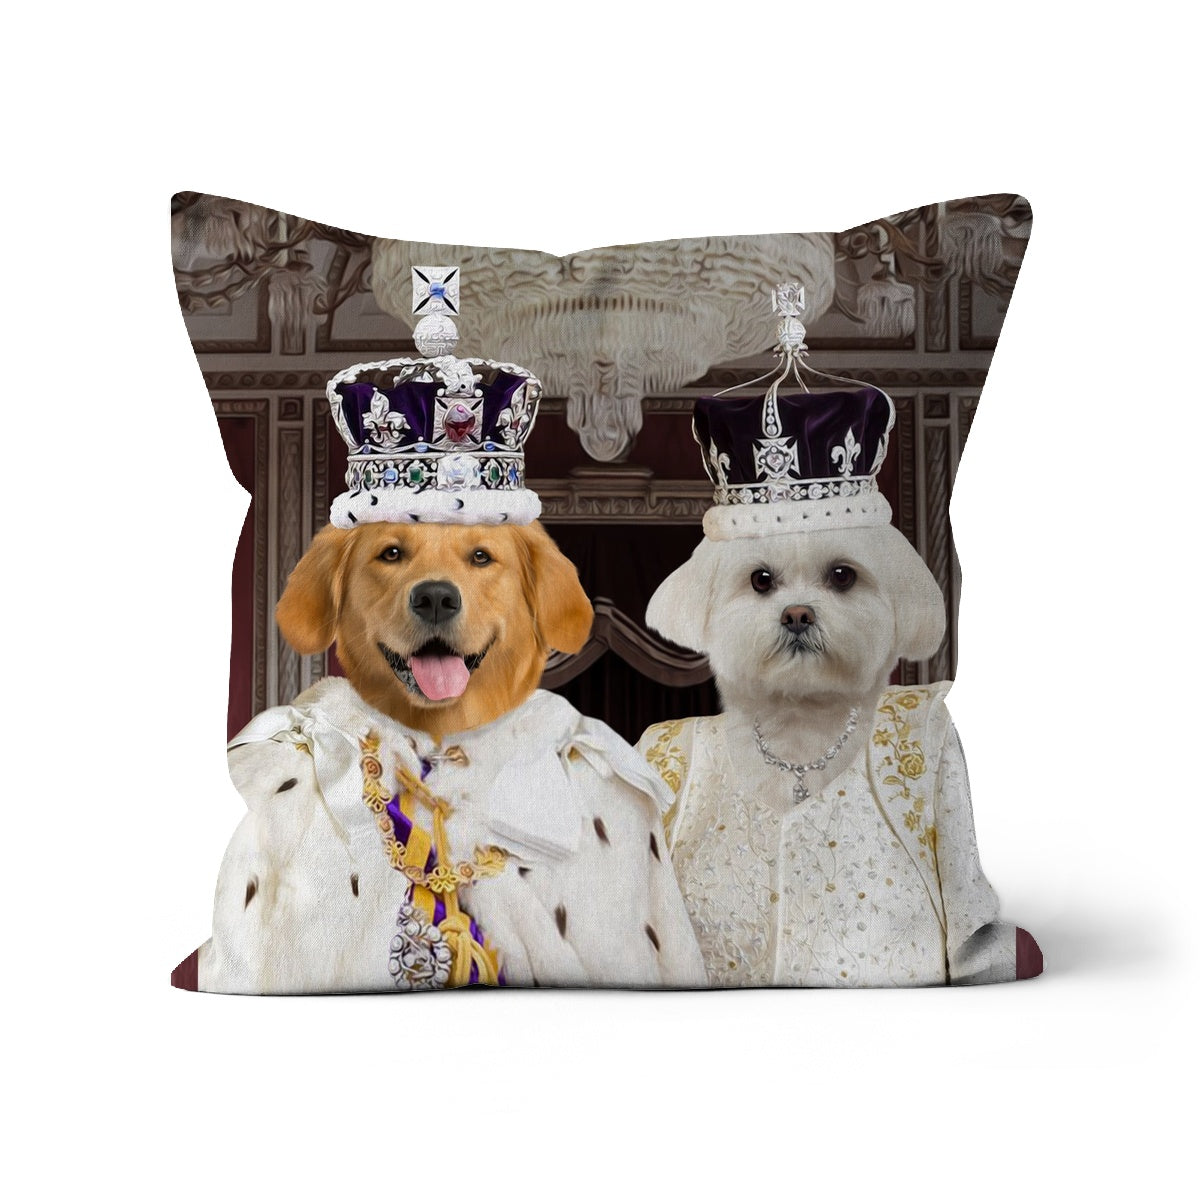 Paw & Glory, paw and glory, pet pillow picture, dog pillow custom, custom pillow design, customized throw pillows, dog on cushion, dog personalized pillow, Pet Portraits cushion,